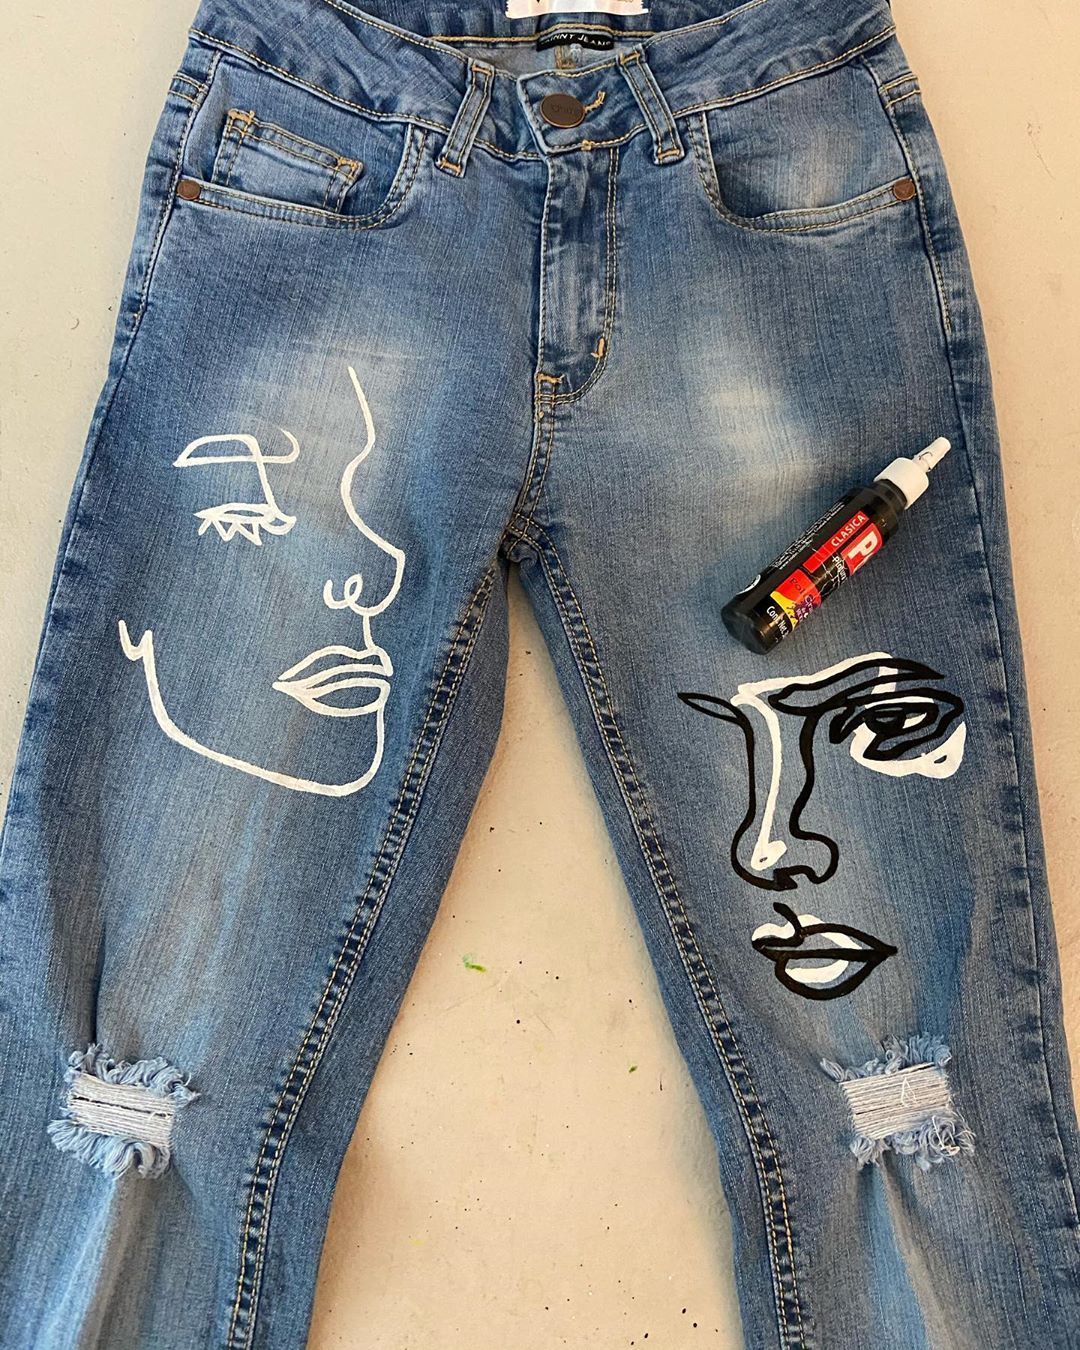 Behind The Scenes By barbie.wera | THE CUSTOM MOVEMENT - Behind The Scenes By barbie.wera | THE CUSTOM MOVEMENT -   13 style Jeans diy ideas